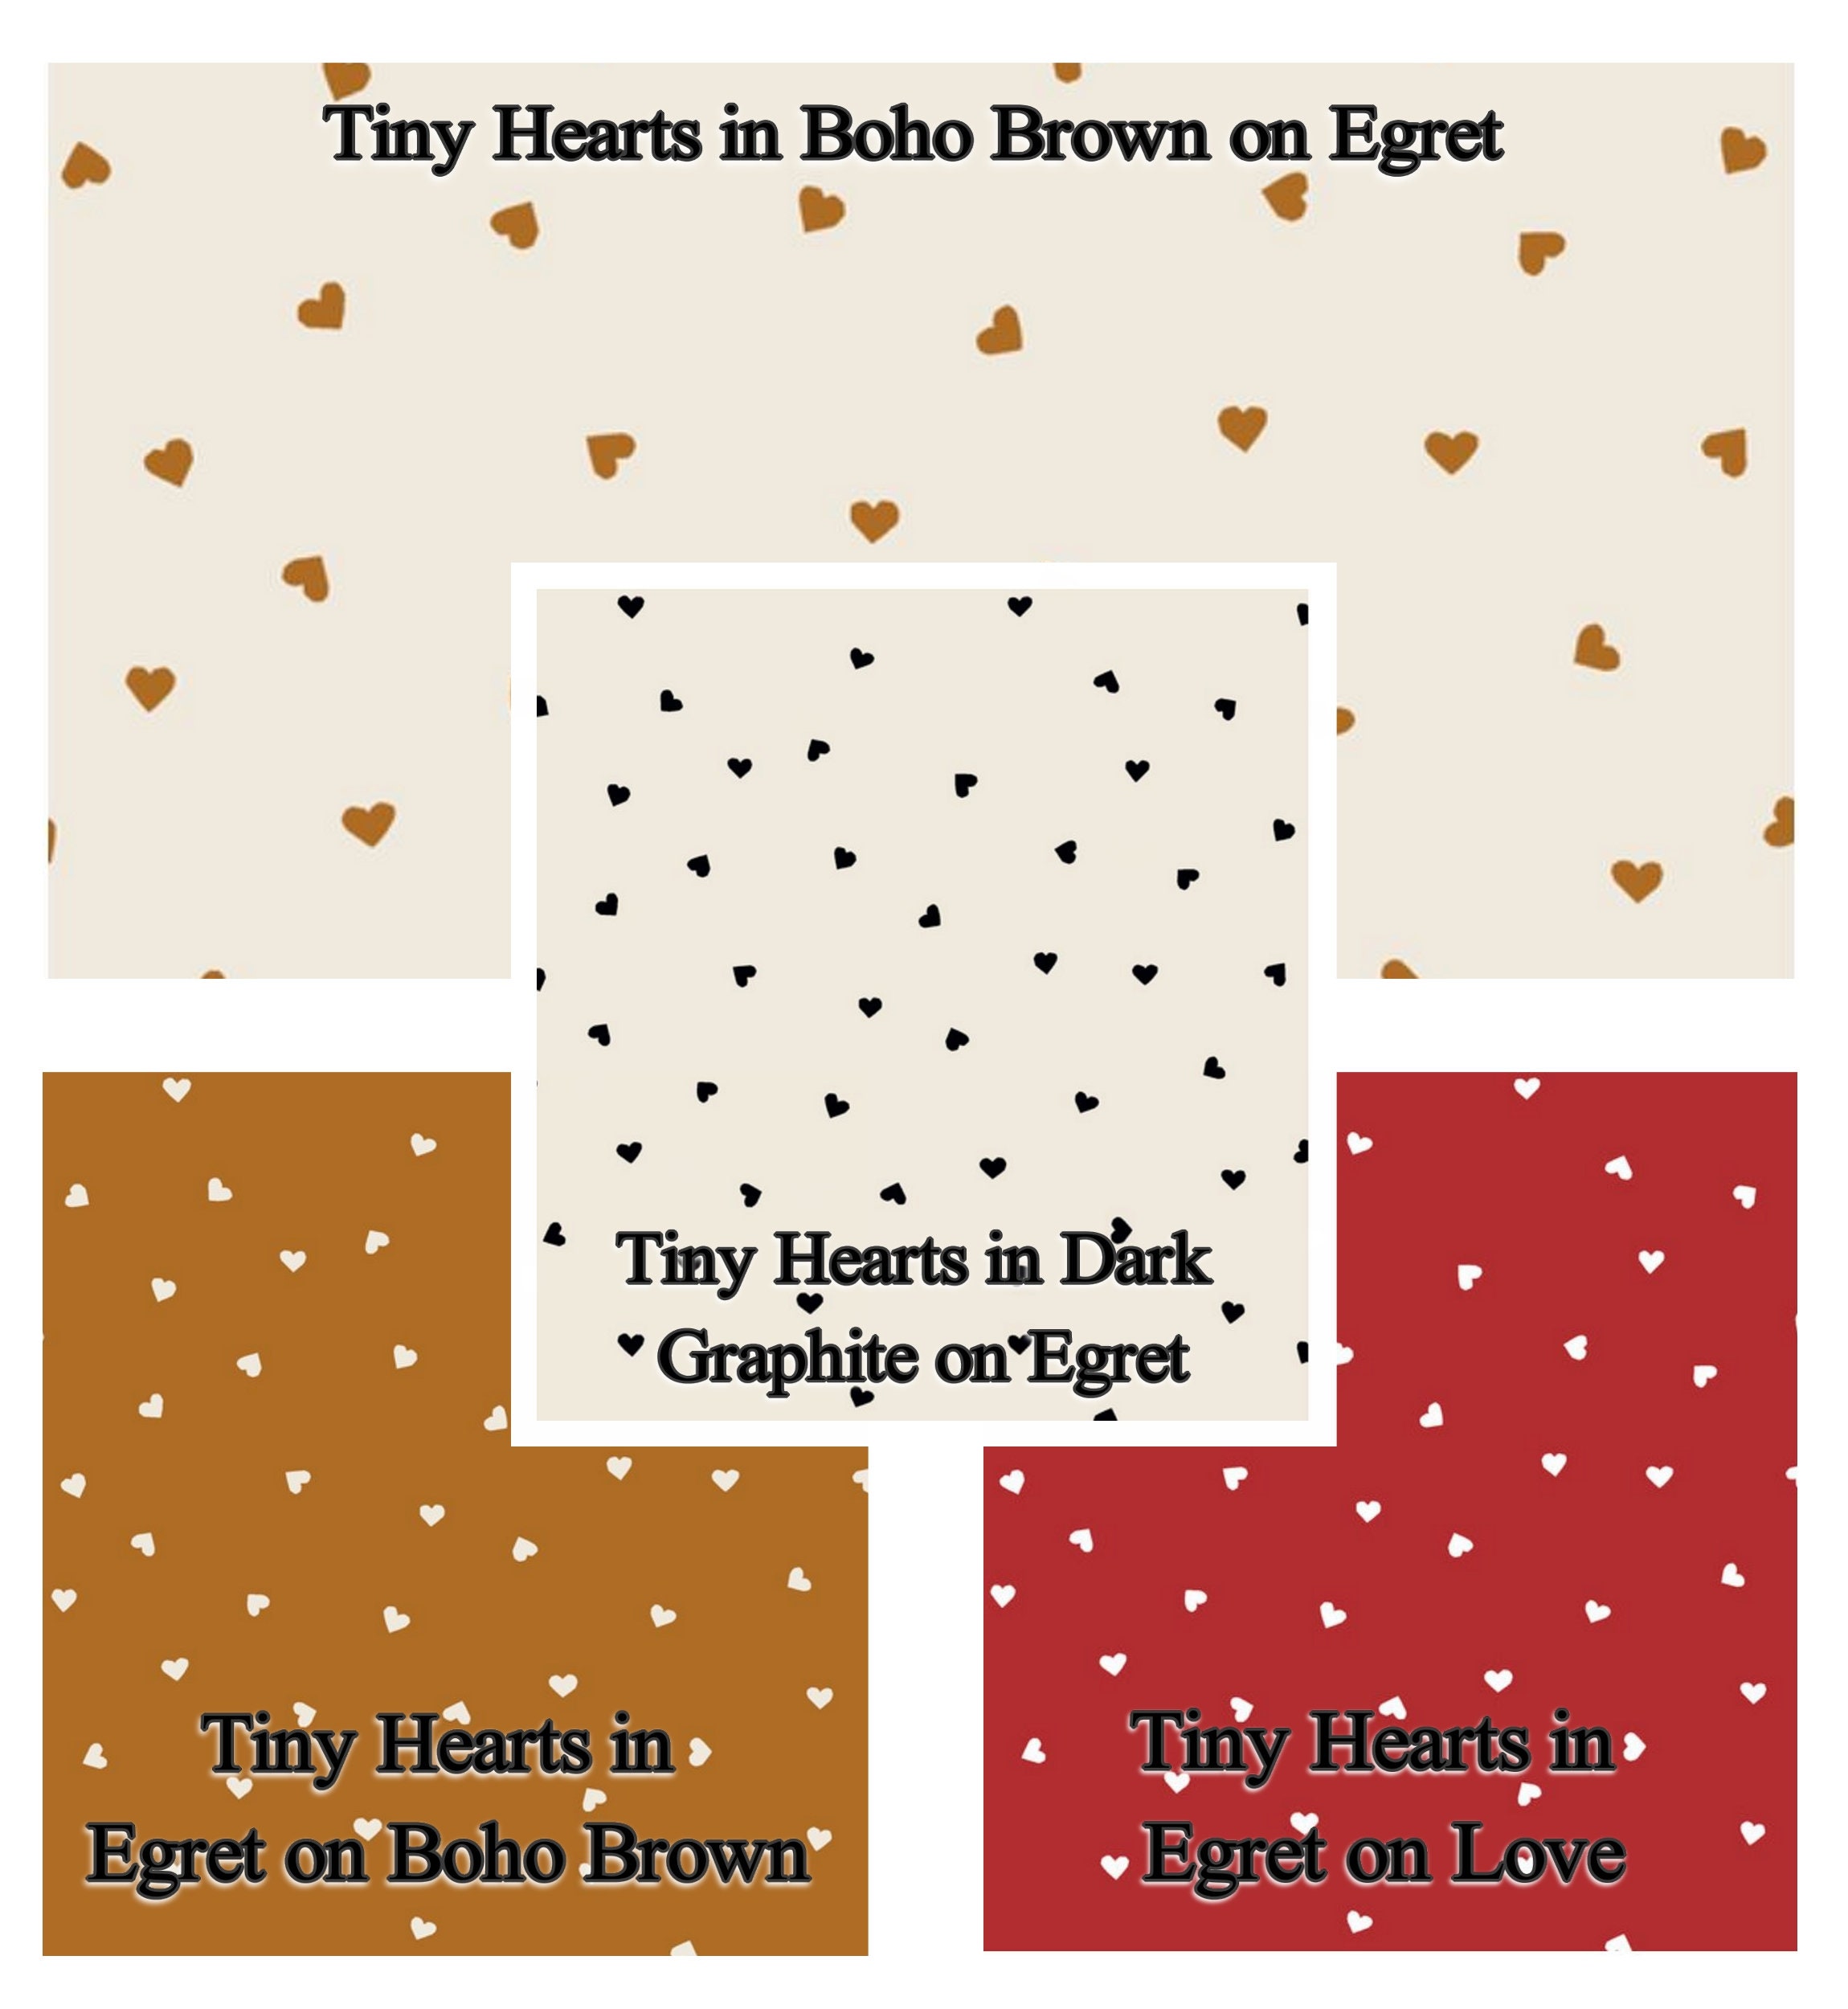 Tiny Hearts in Boho Brown on Egret